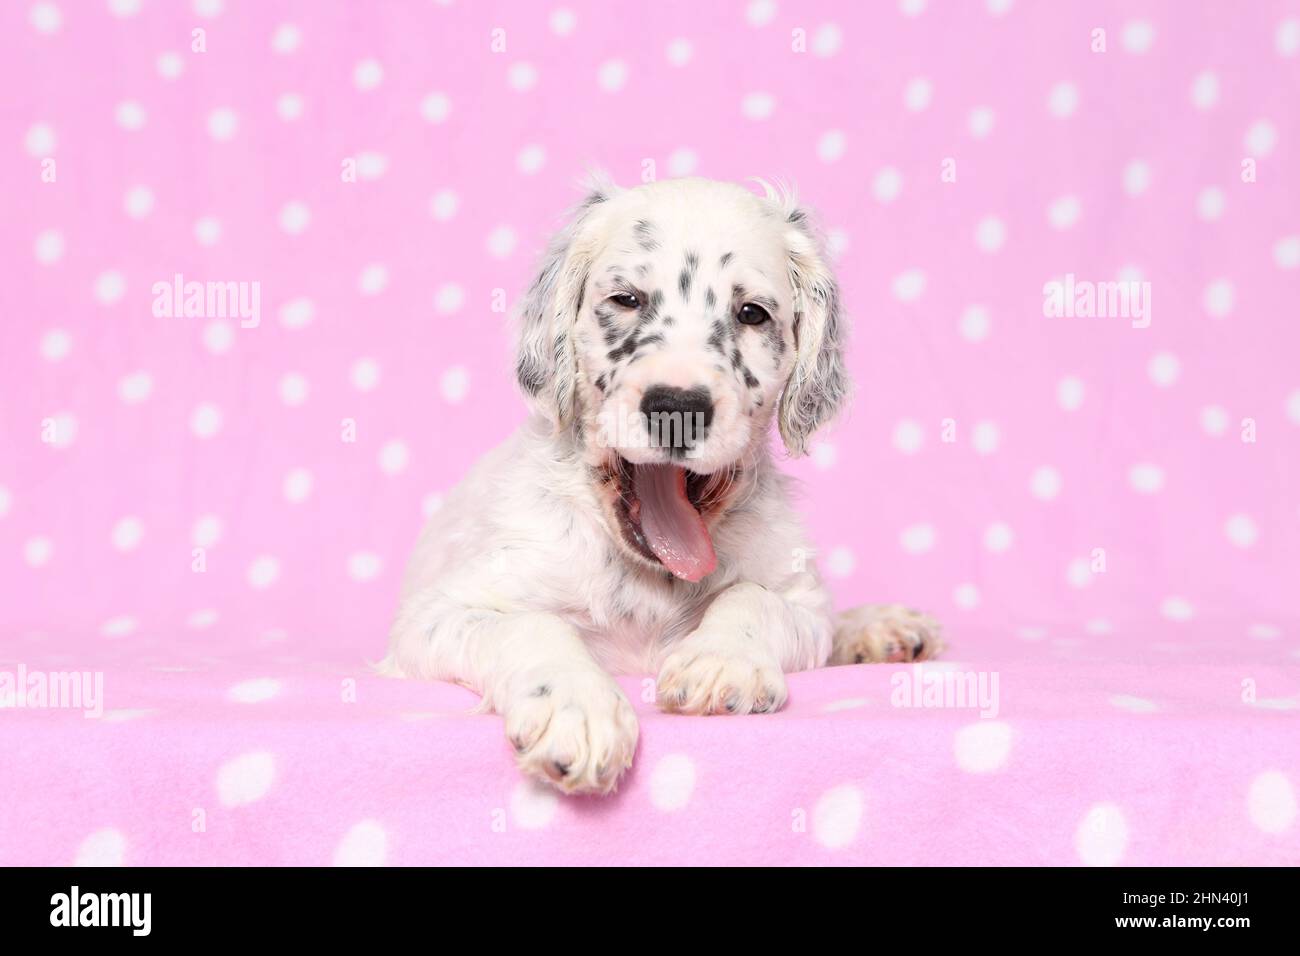 English Setter. Puppy lying on a pink blanket with polka dots, yawning. Germany Stock Photo